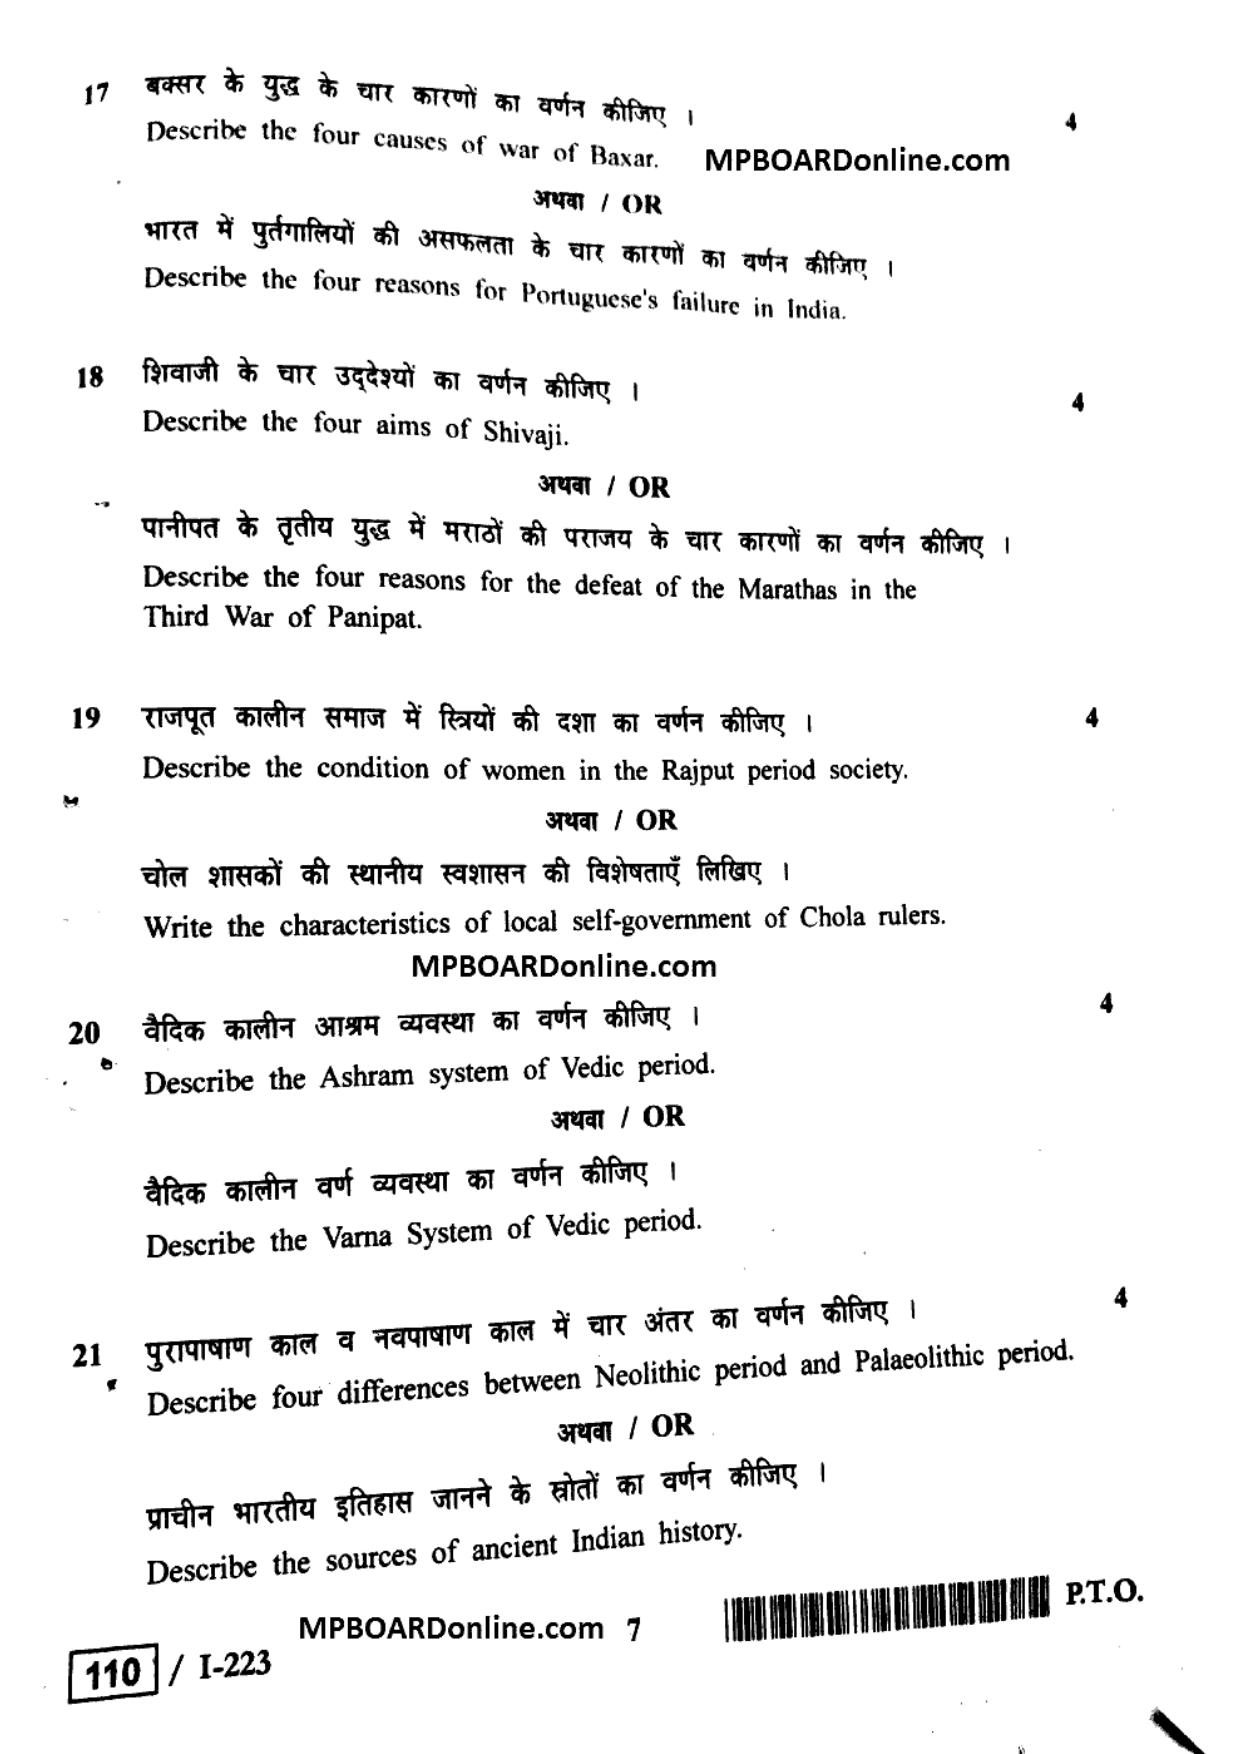 MP Board Class 12 History 2018 Question Paper - Page 7